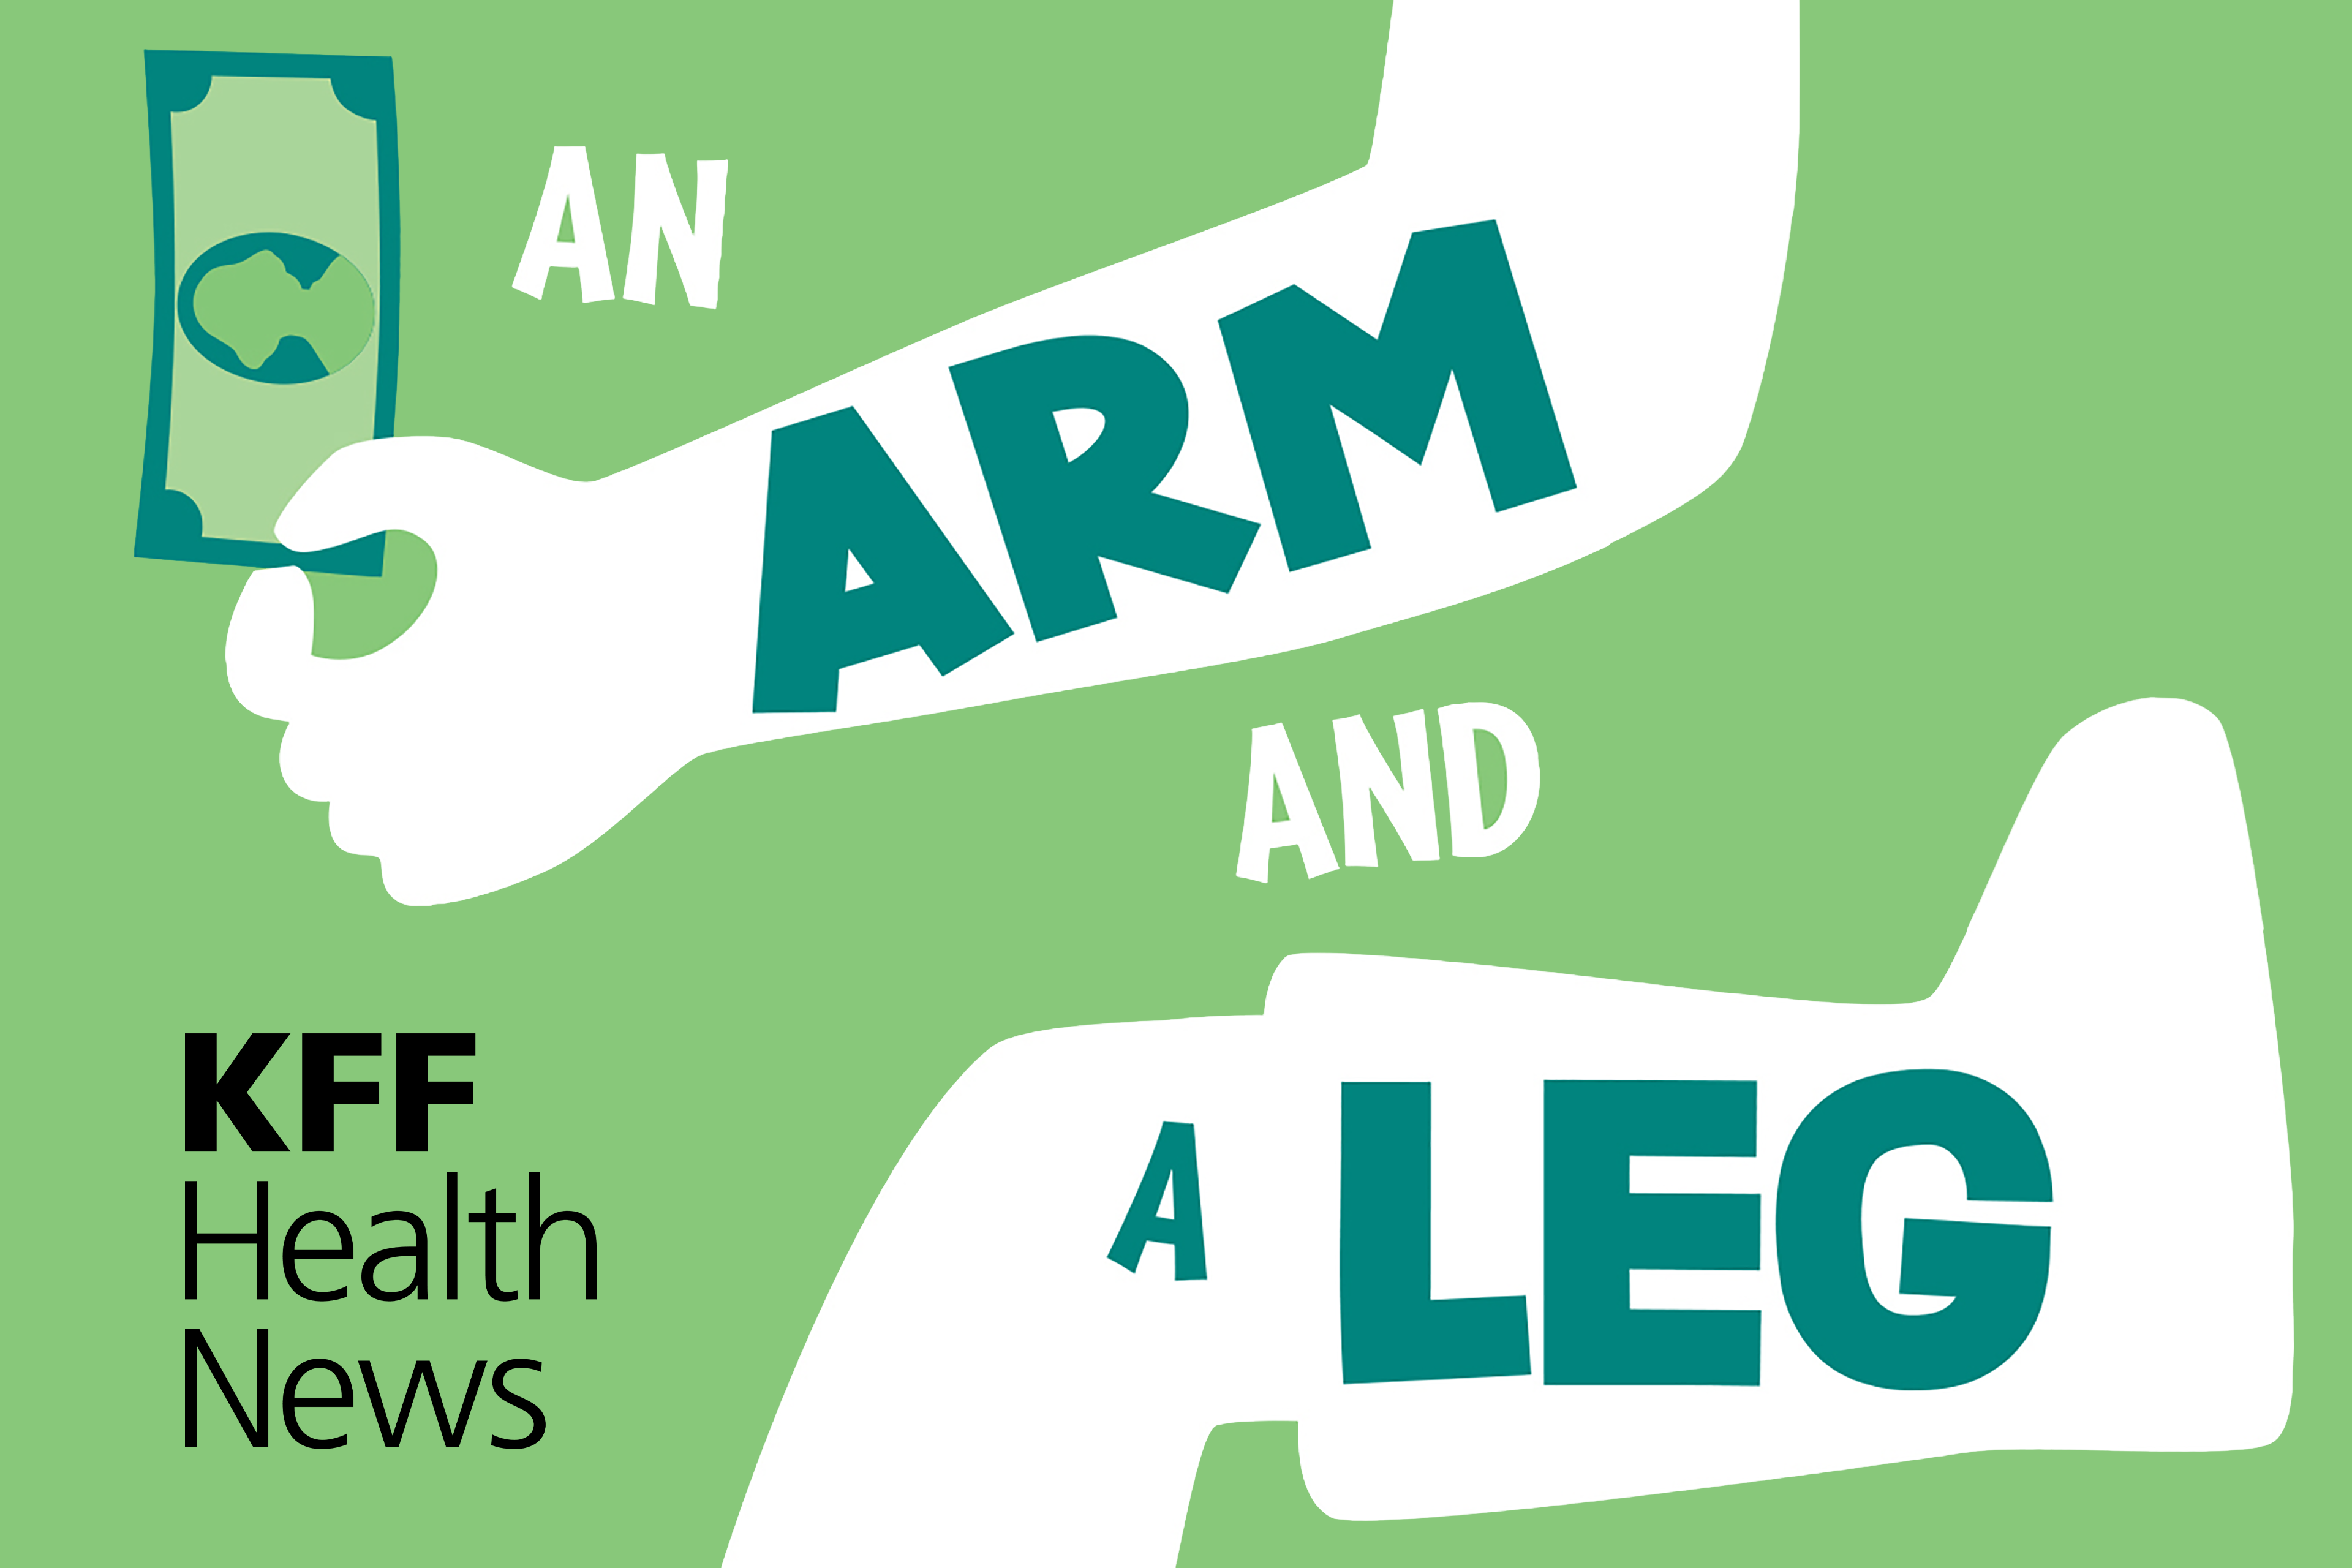 ‘An Arm and a Leg’: When Hospitals Sue Patients (Part 2)